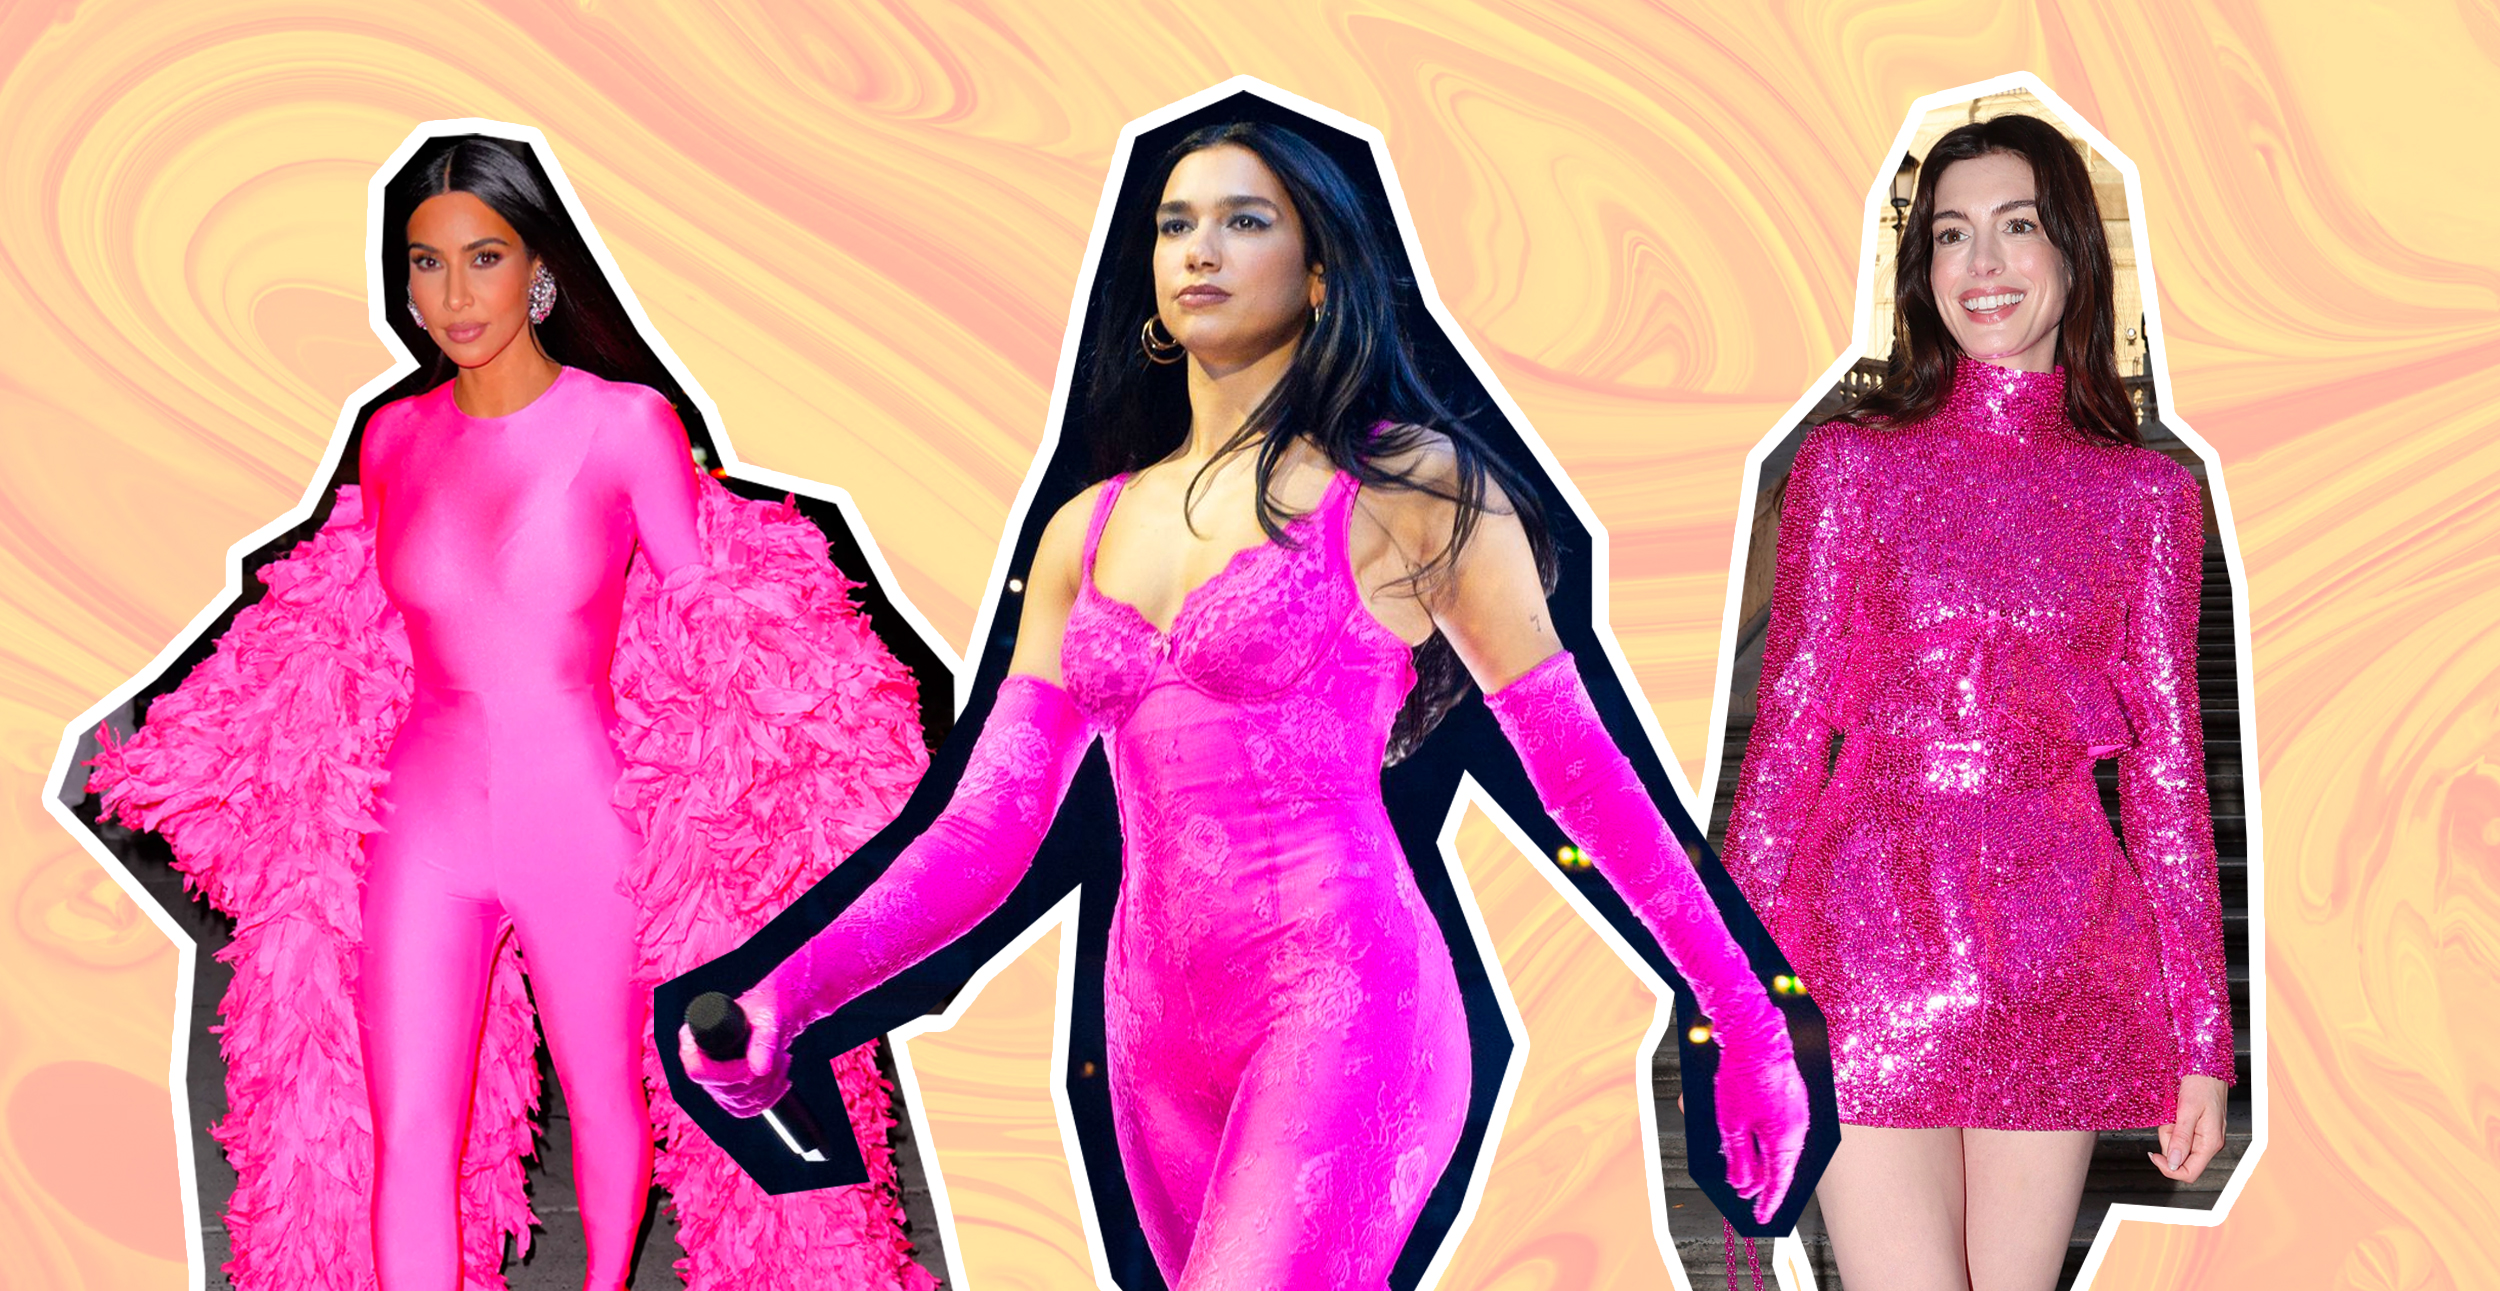 While celebrities including Kim Kardashian, Dua Lipa and Anne Hathaway all love pink, fashion houses have recently made its shades the main colours of their collections